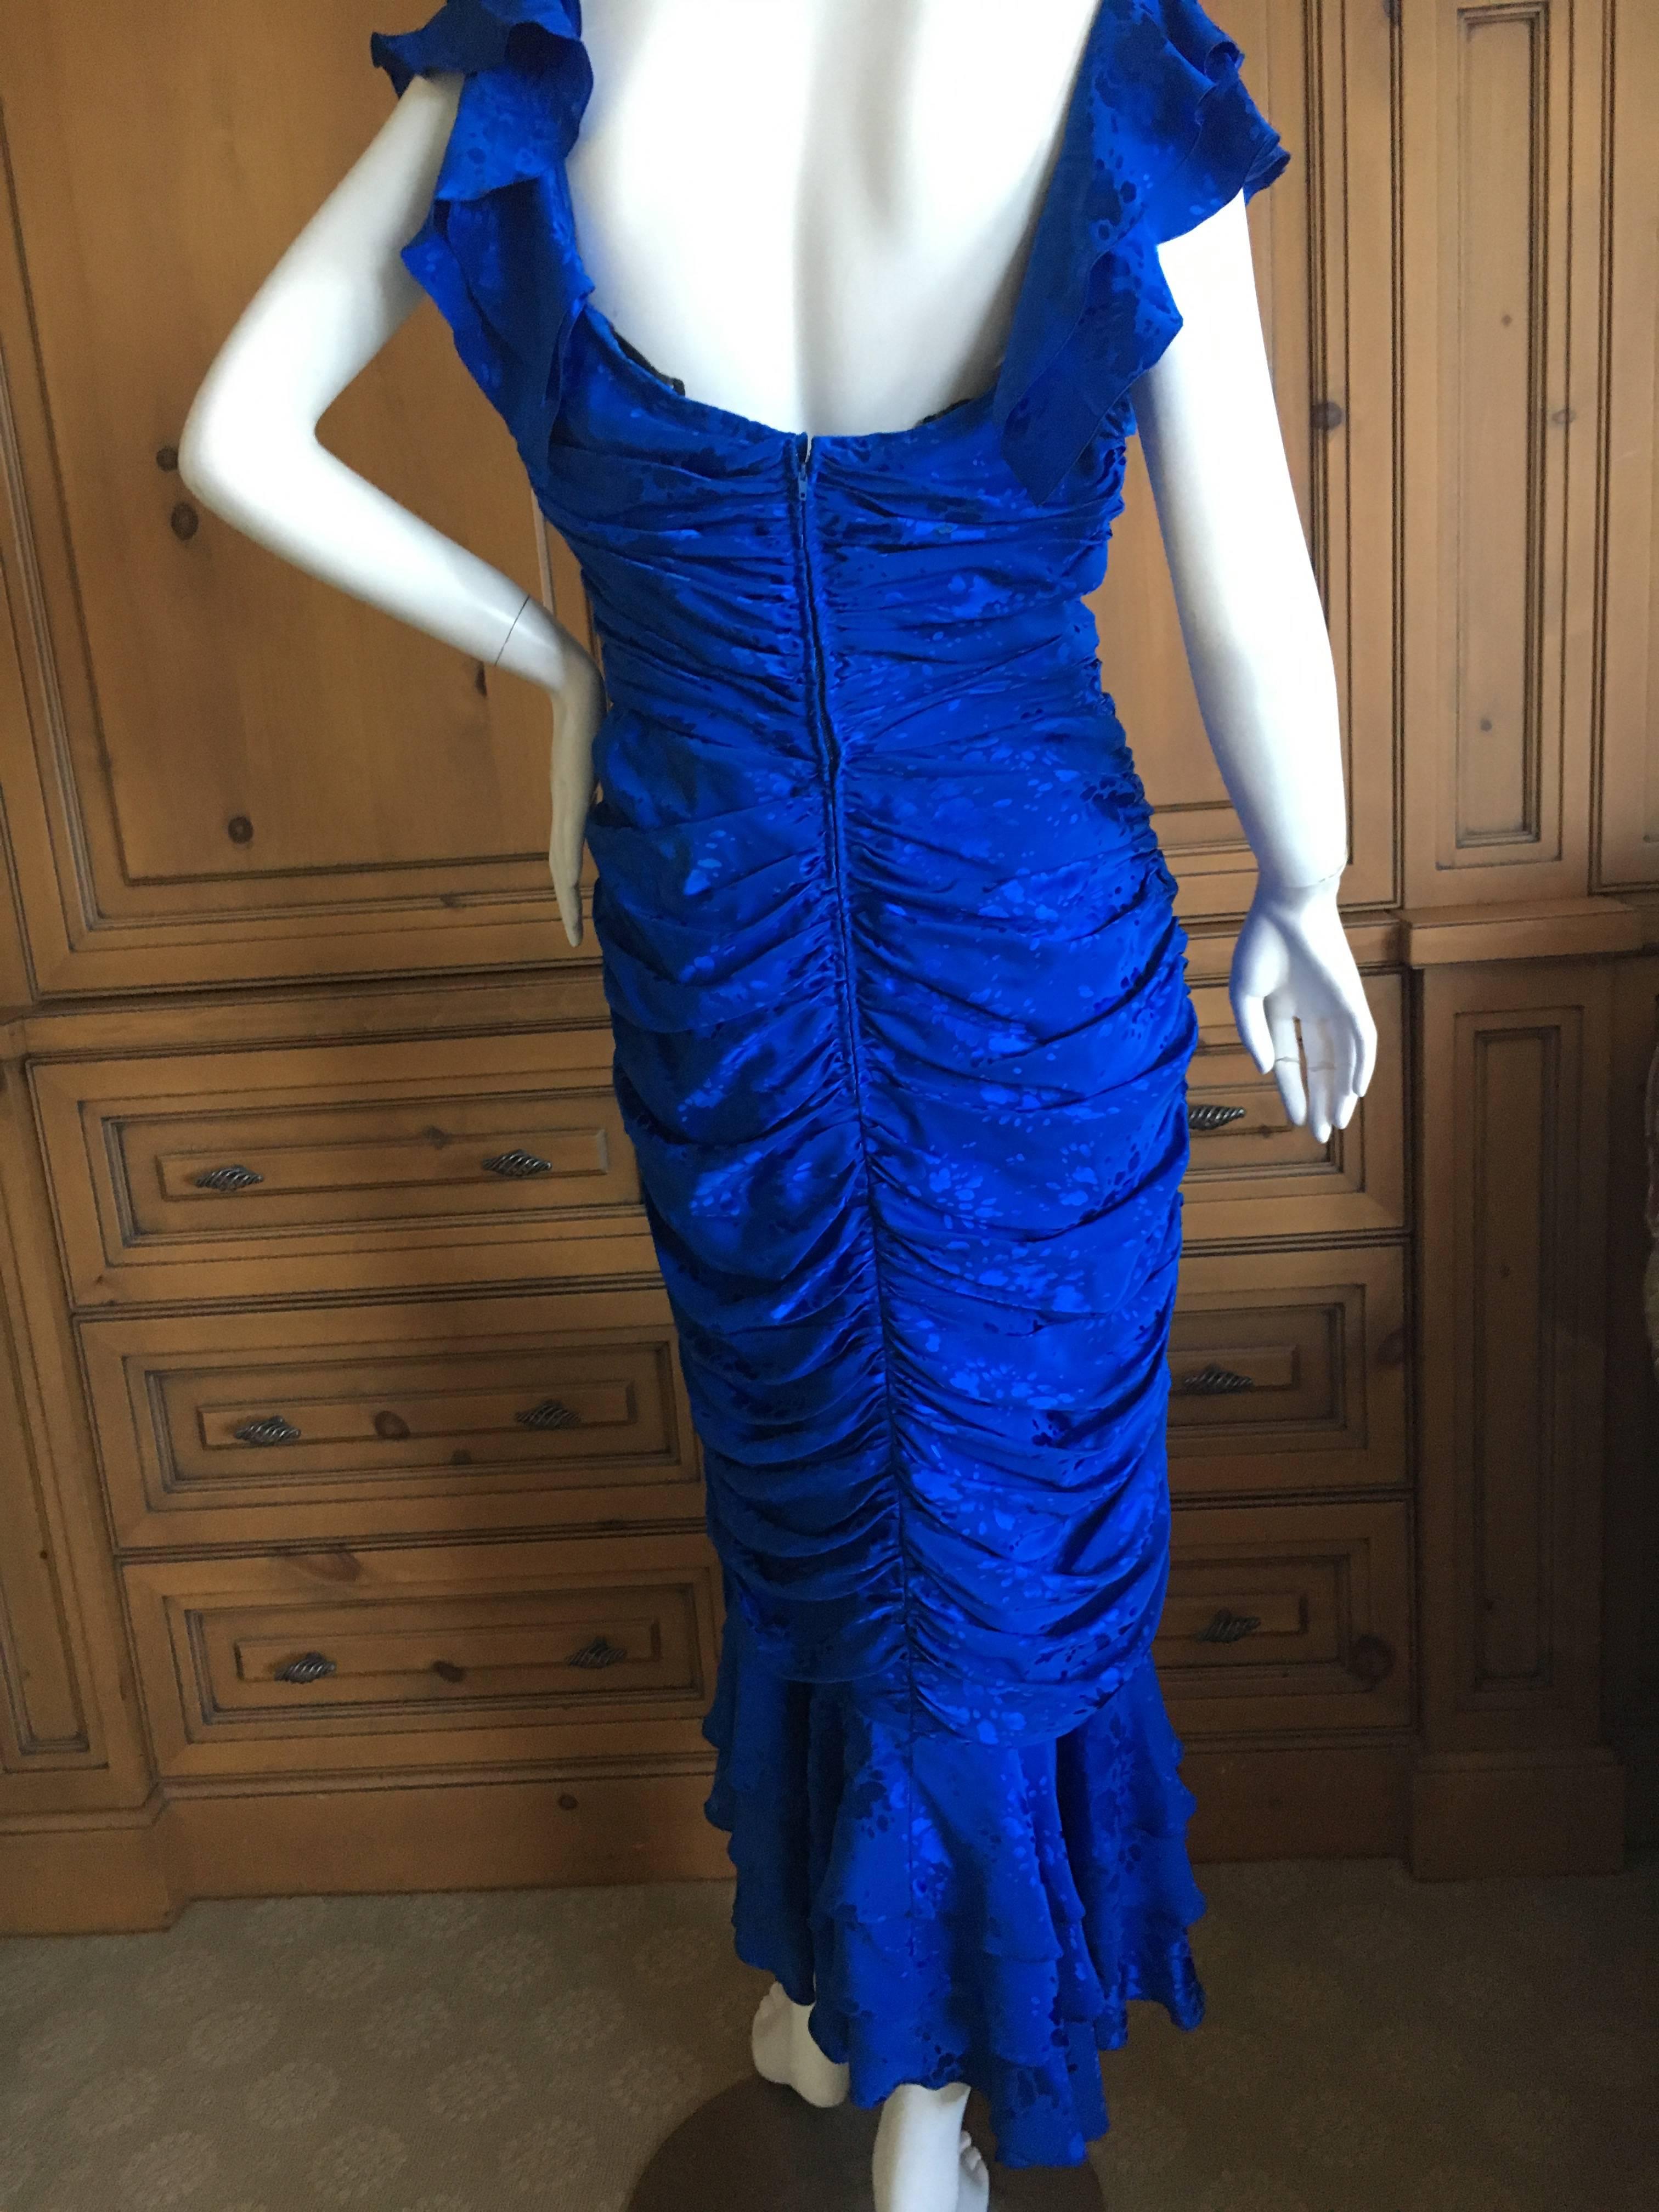 Women's Loris Azzaro Couture 1970's Ruched Blue Silk Evening Dress For Sale